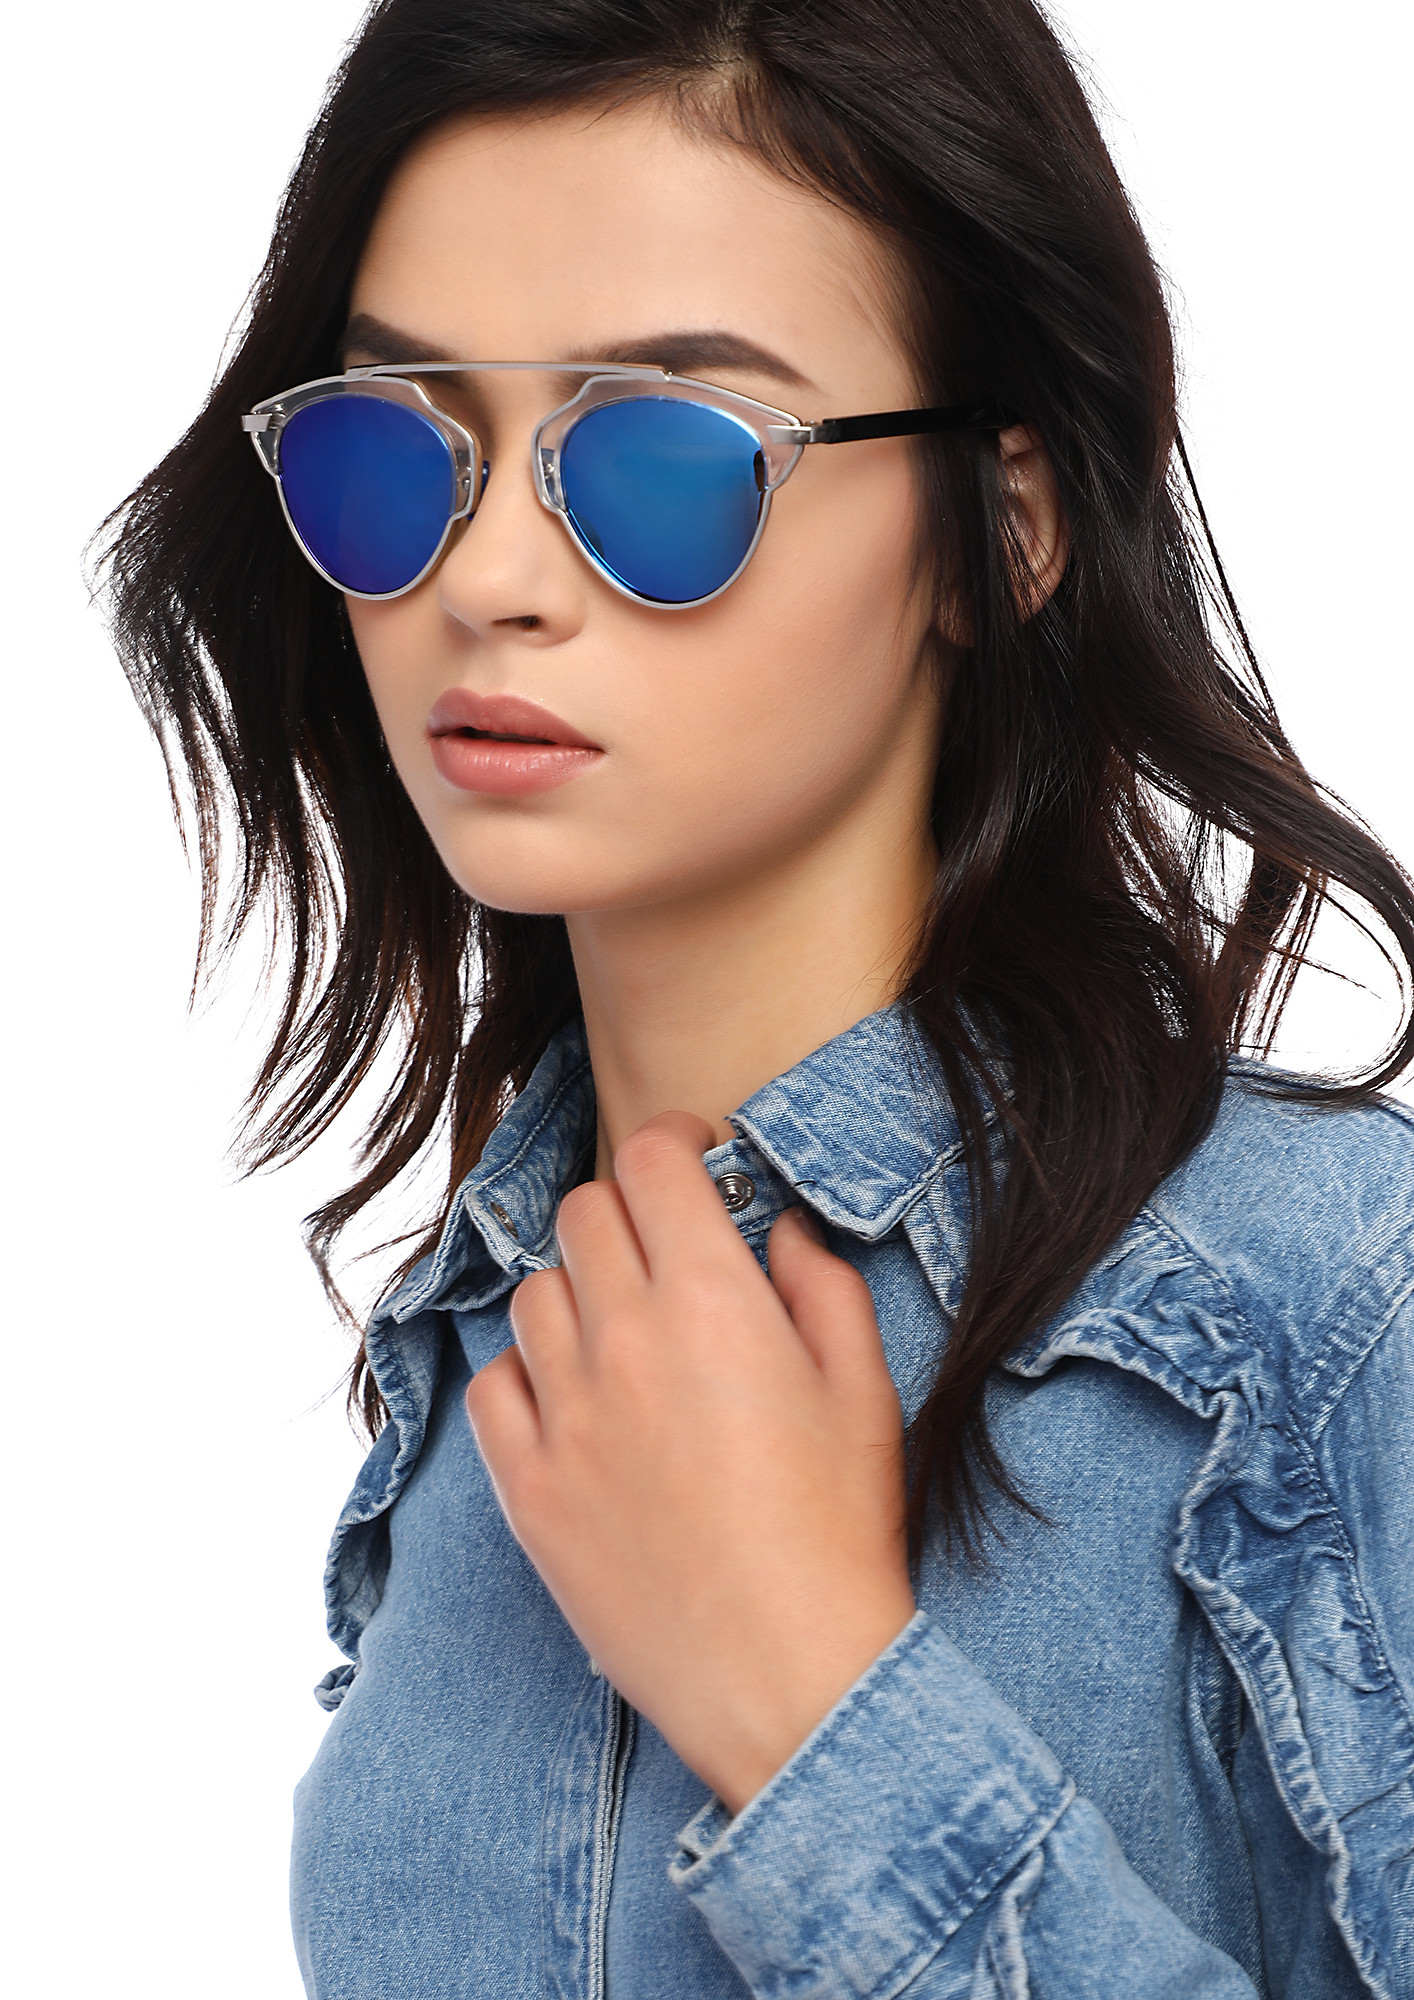 ONLY FOR YOU BLUE AVIATORS